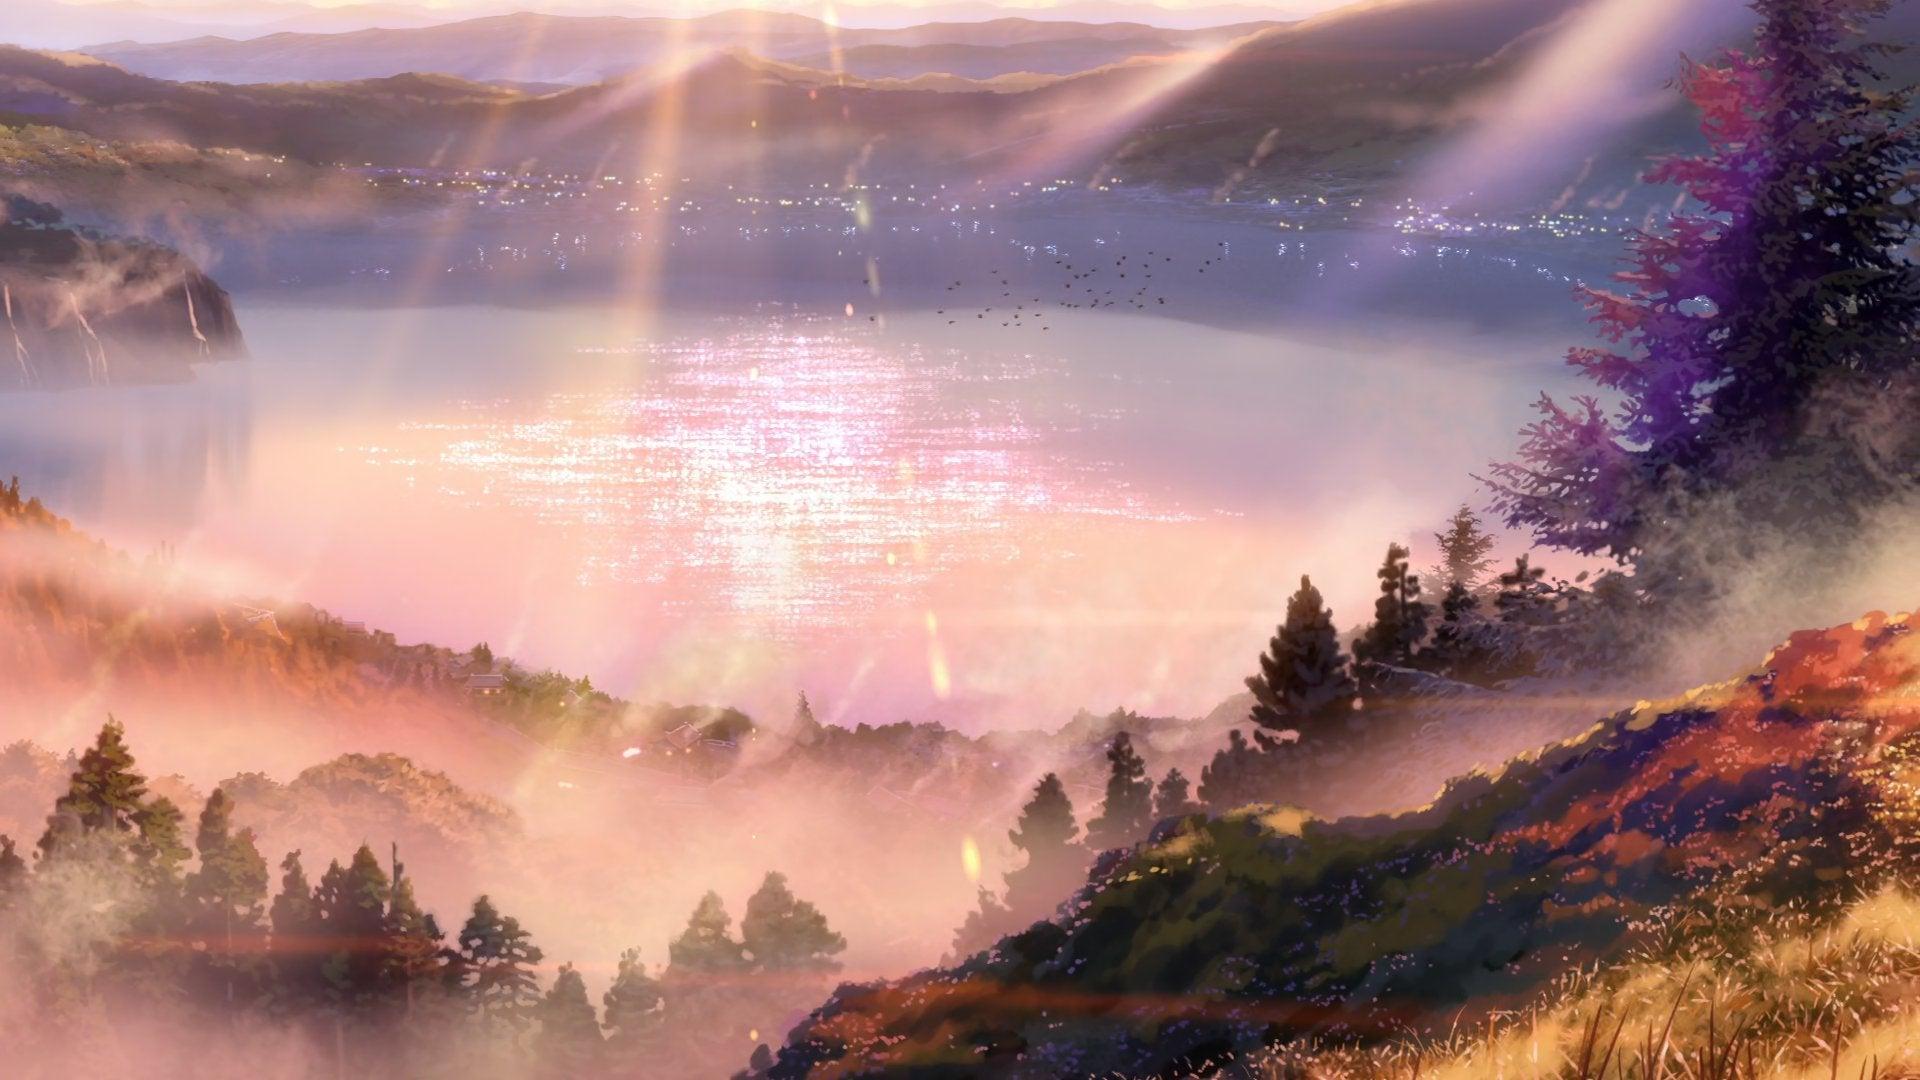 Art in all its glory: >110 FHD wallpapers from 君の名は/Your Name